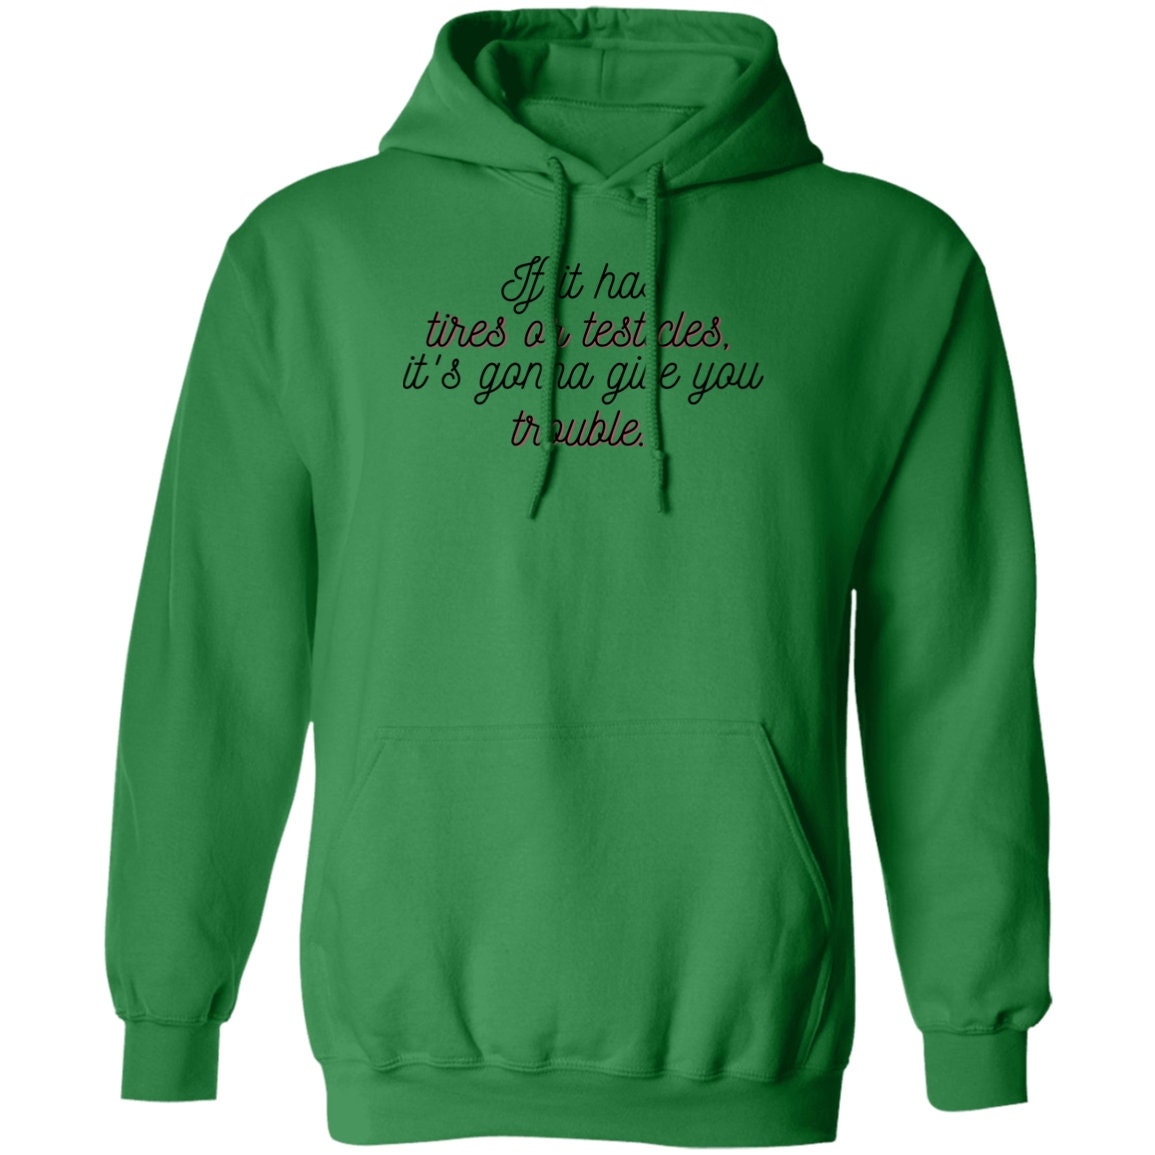 If it has tires or testicles, it's gonna be trouble. Hoodie